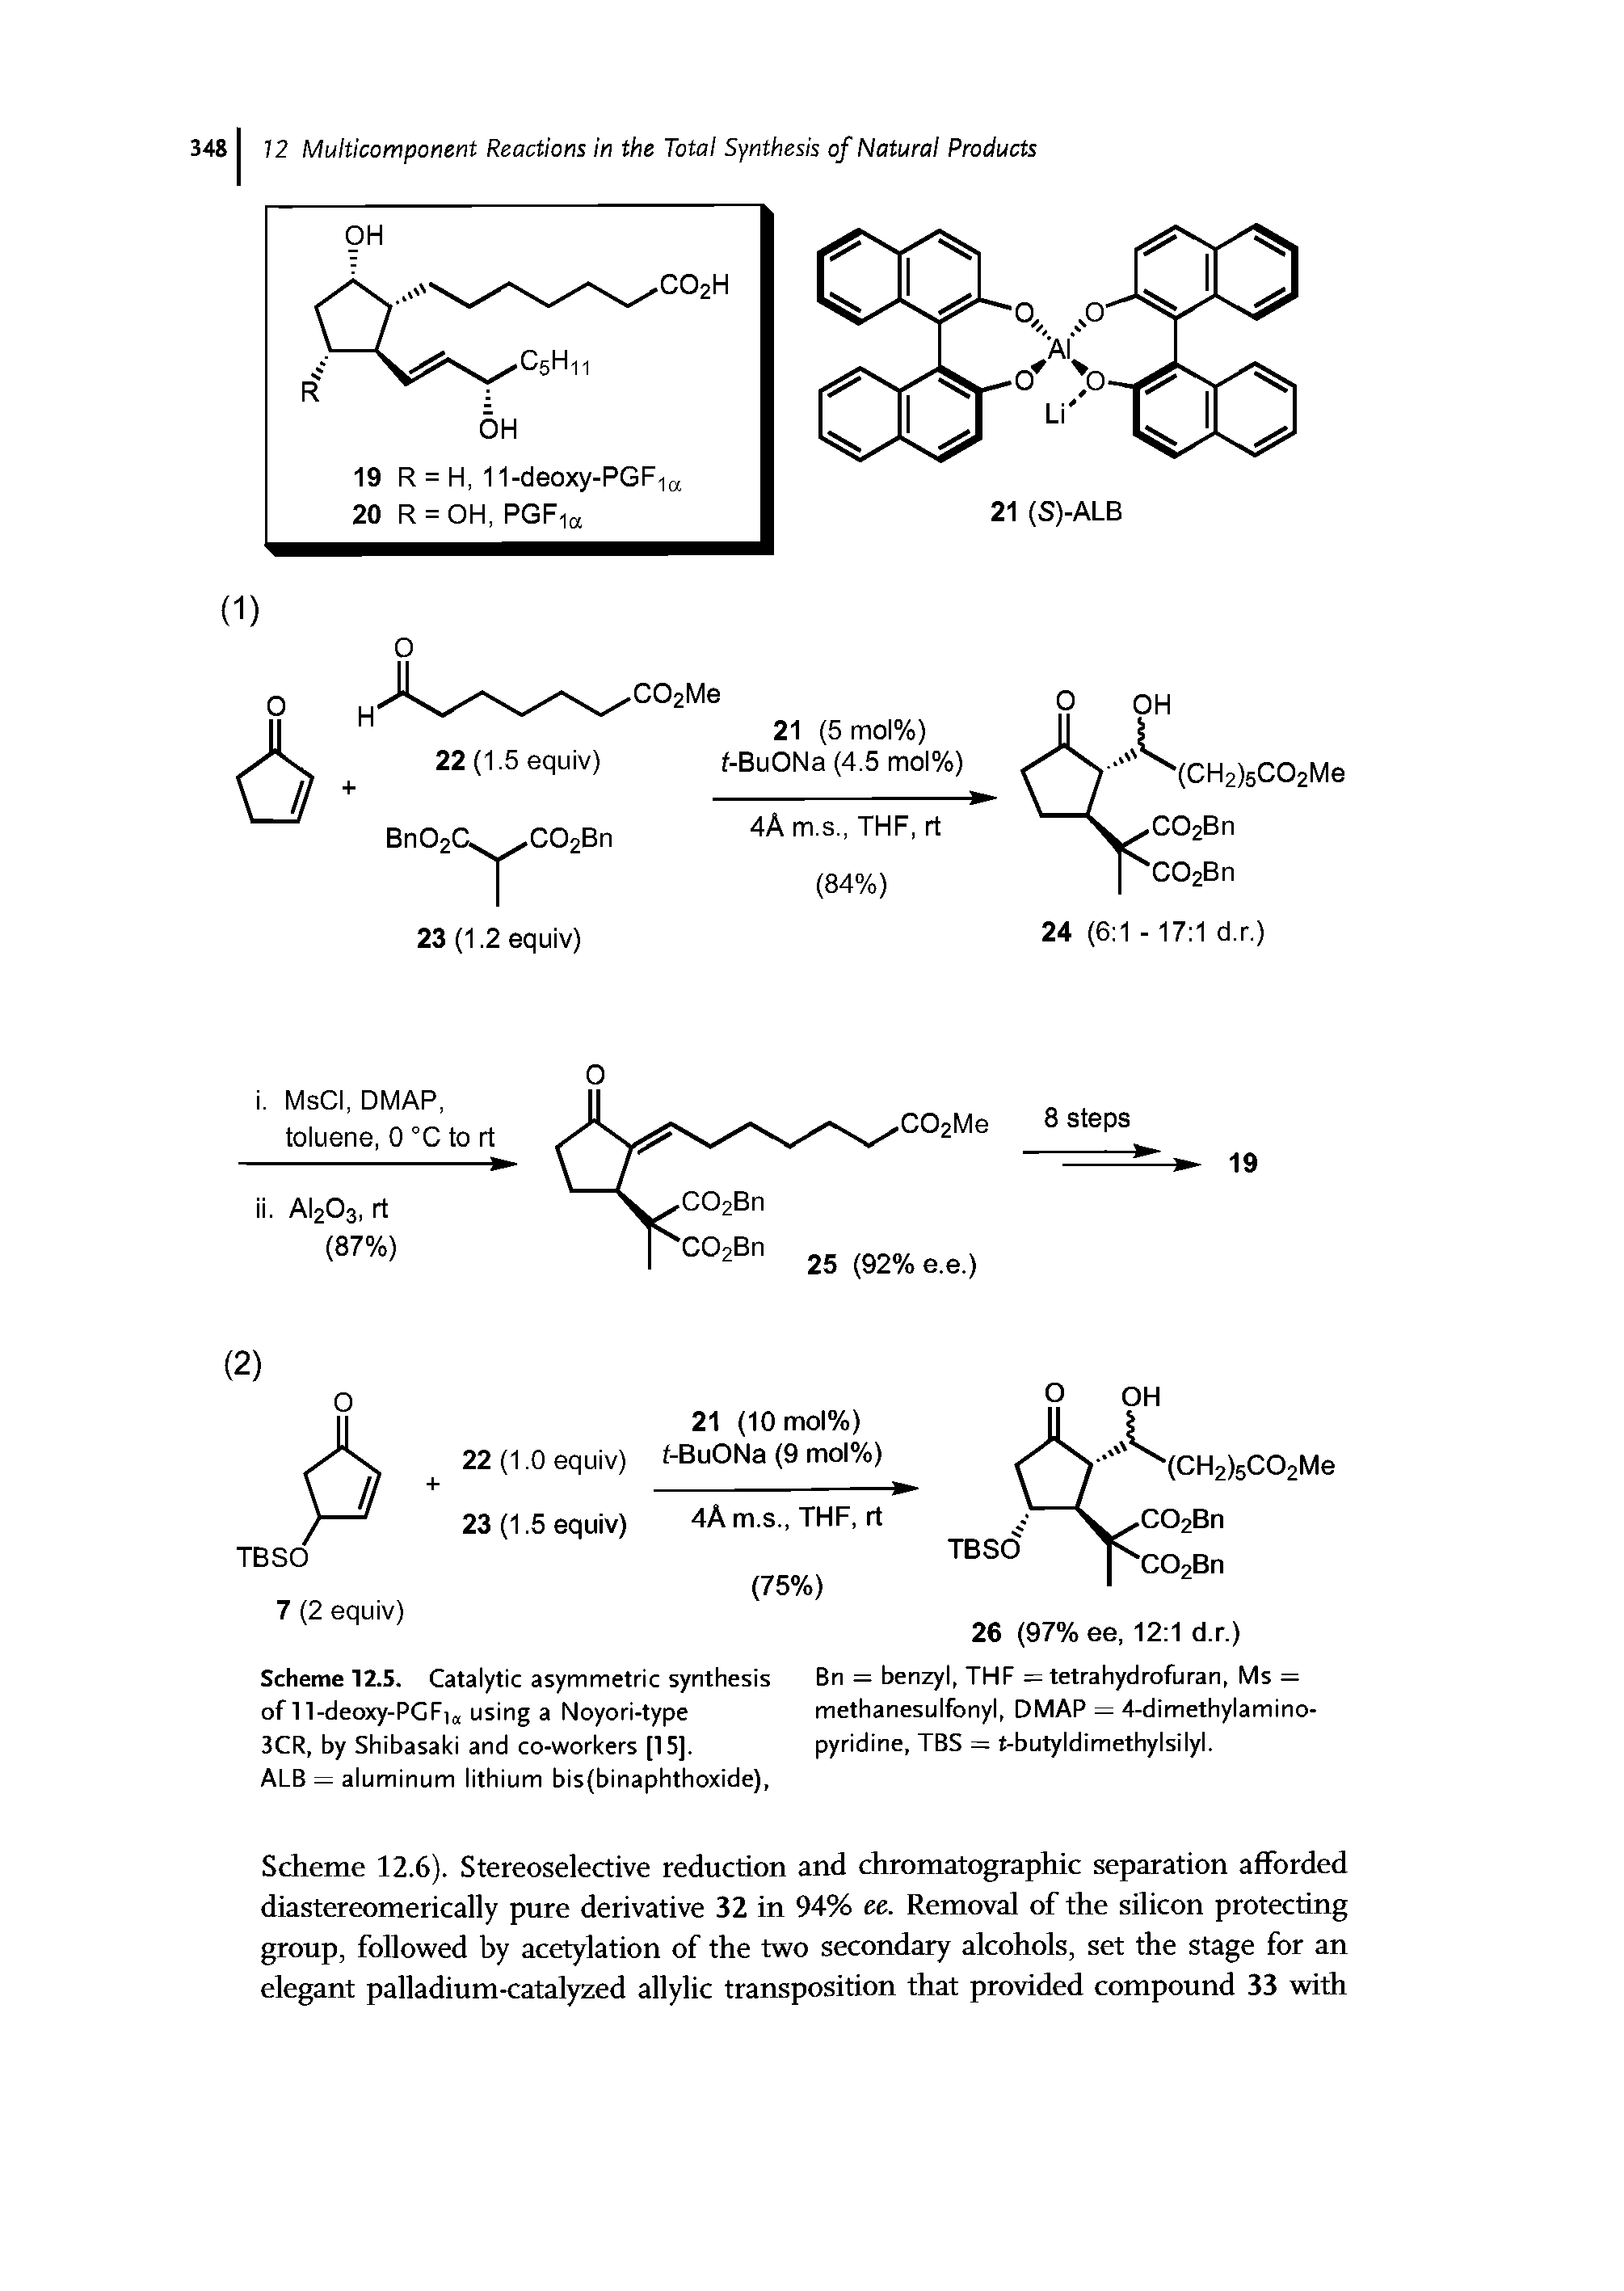 Scheme 12.6). Stereoselective reduction and chromatographic separation afforded diastereomerically pure derivative 32 in 94% ee. Removal of the silicon protecting group, followed by acetylation of the two secondary alcohols, set the stage for an elegant palladium-catalyzed allylic transposition that provided compound 33 with...